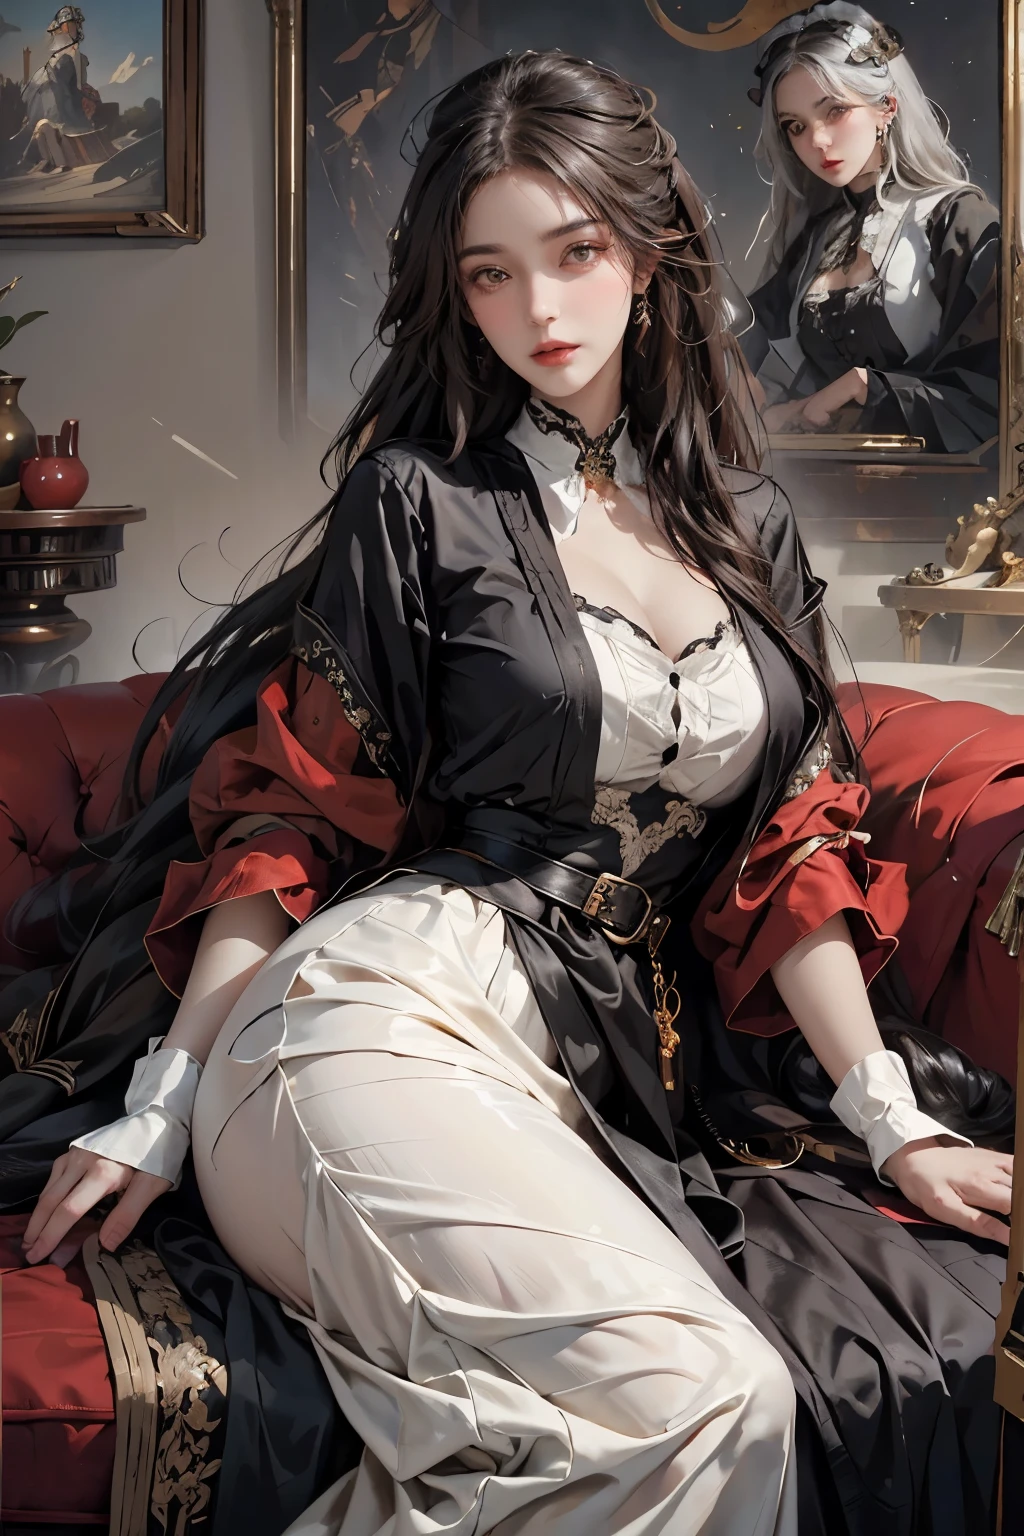 An anthropomorphic Afghan hound with big, happy eyes and a seductive look adorns this steampunk-inspired illustration. Dressed in a Victorian-era outfit, she oozes femininity and allure, accentuated by her full, flowing red skirt and intricately detailed red belt. Her large, expressive eyes gleam with mischief as she flirts shamelessly, her long ears perked up in anticipation.

This captivating image, reminiscent of the masterful work of Ian McQue, is rendered in exquisite detail in the style of an oil painting. Every curve and contour of her voluptuous figure is delicately